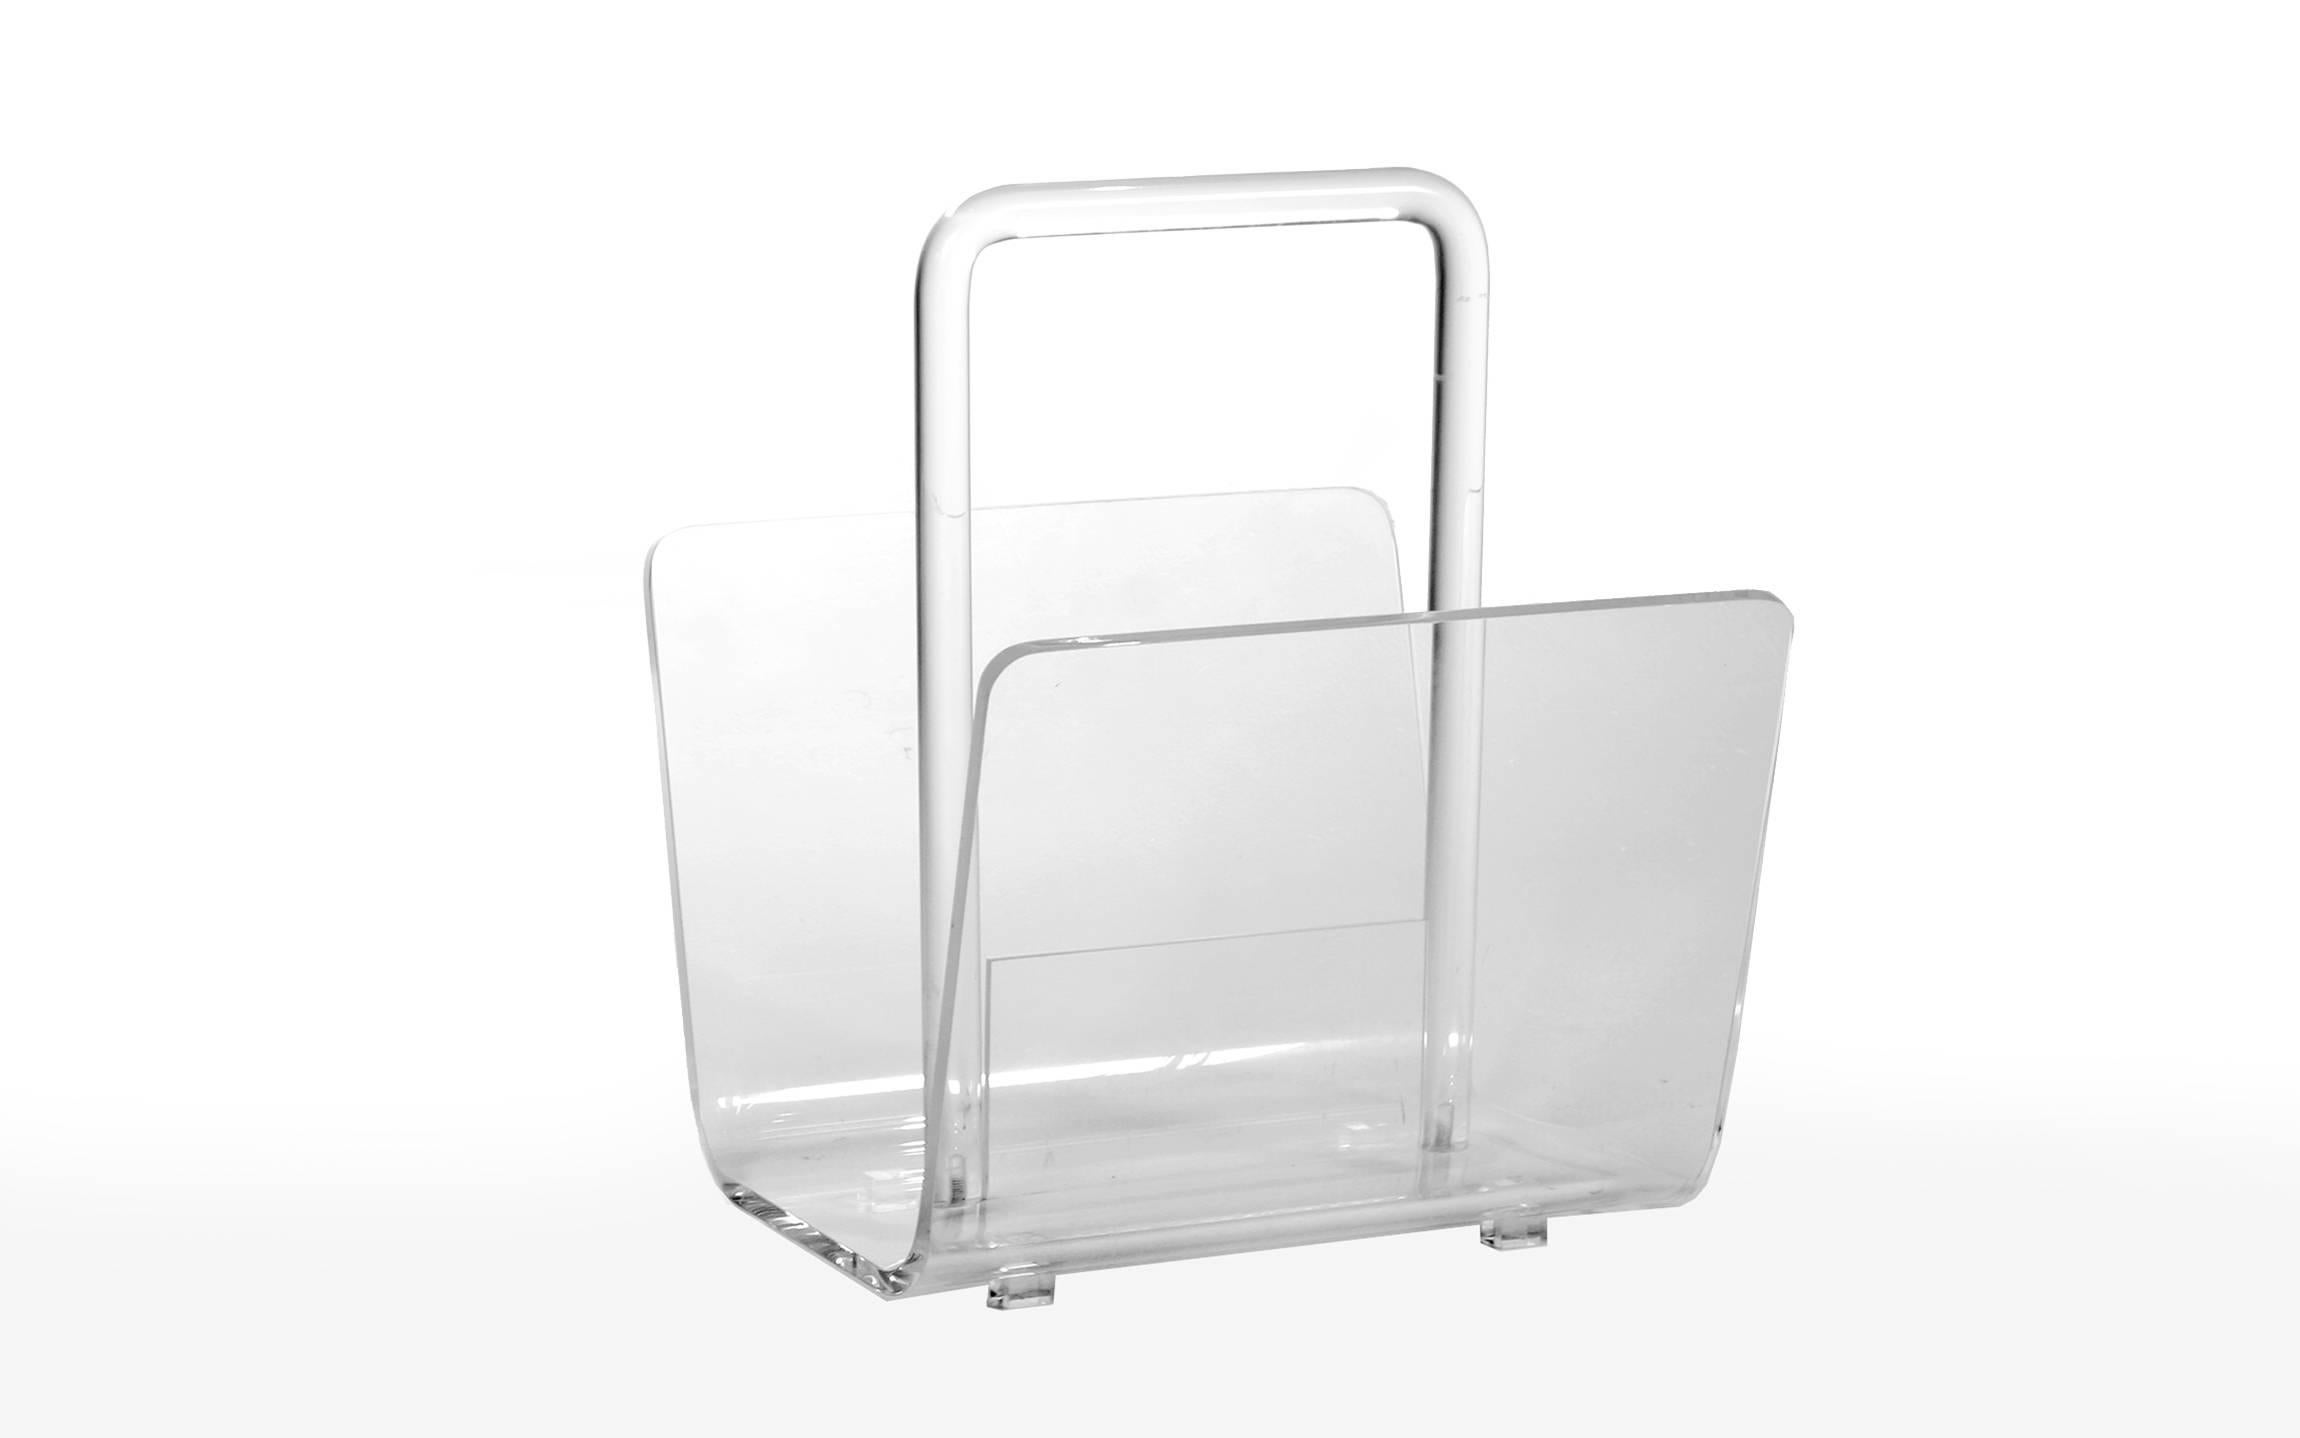 1970s Lucite magazine stand. High quality thick acrylic construction.